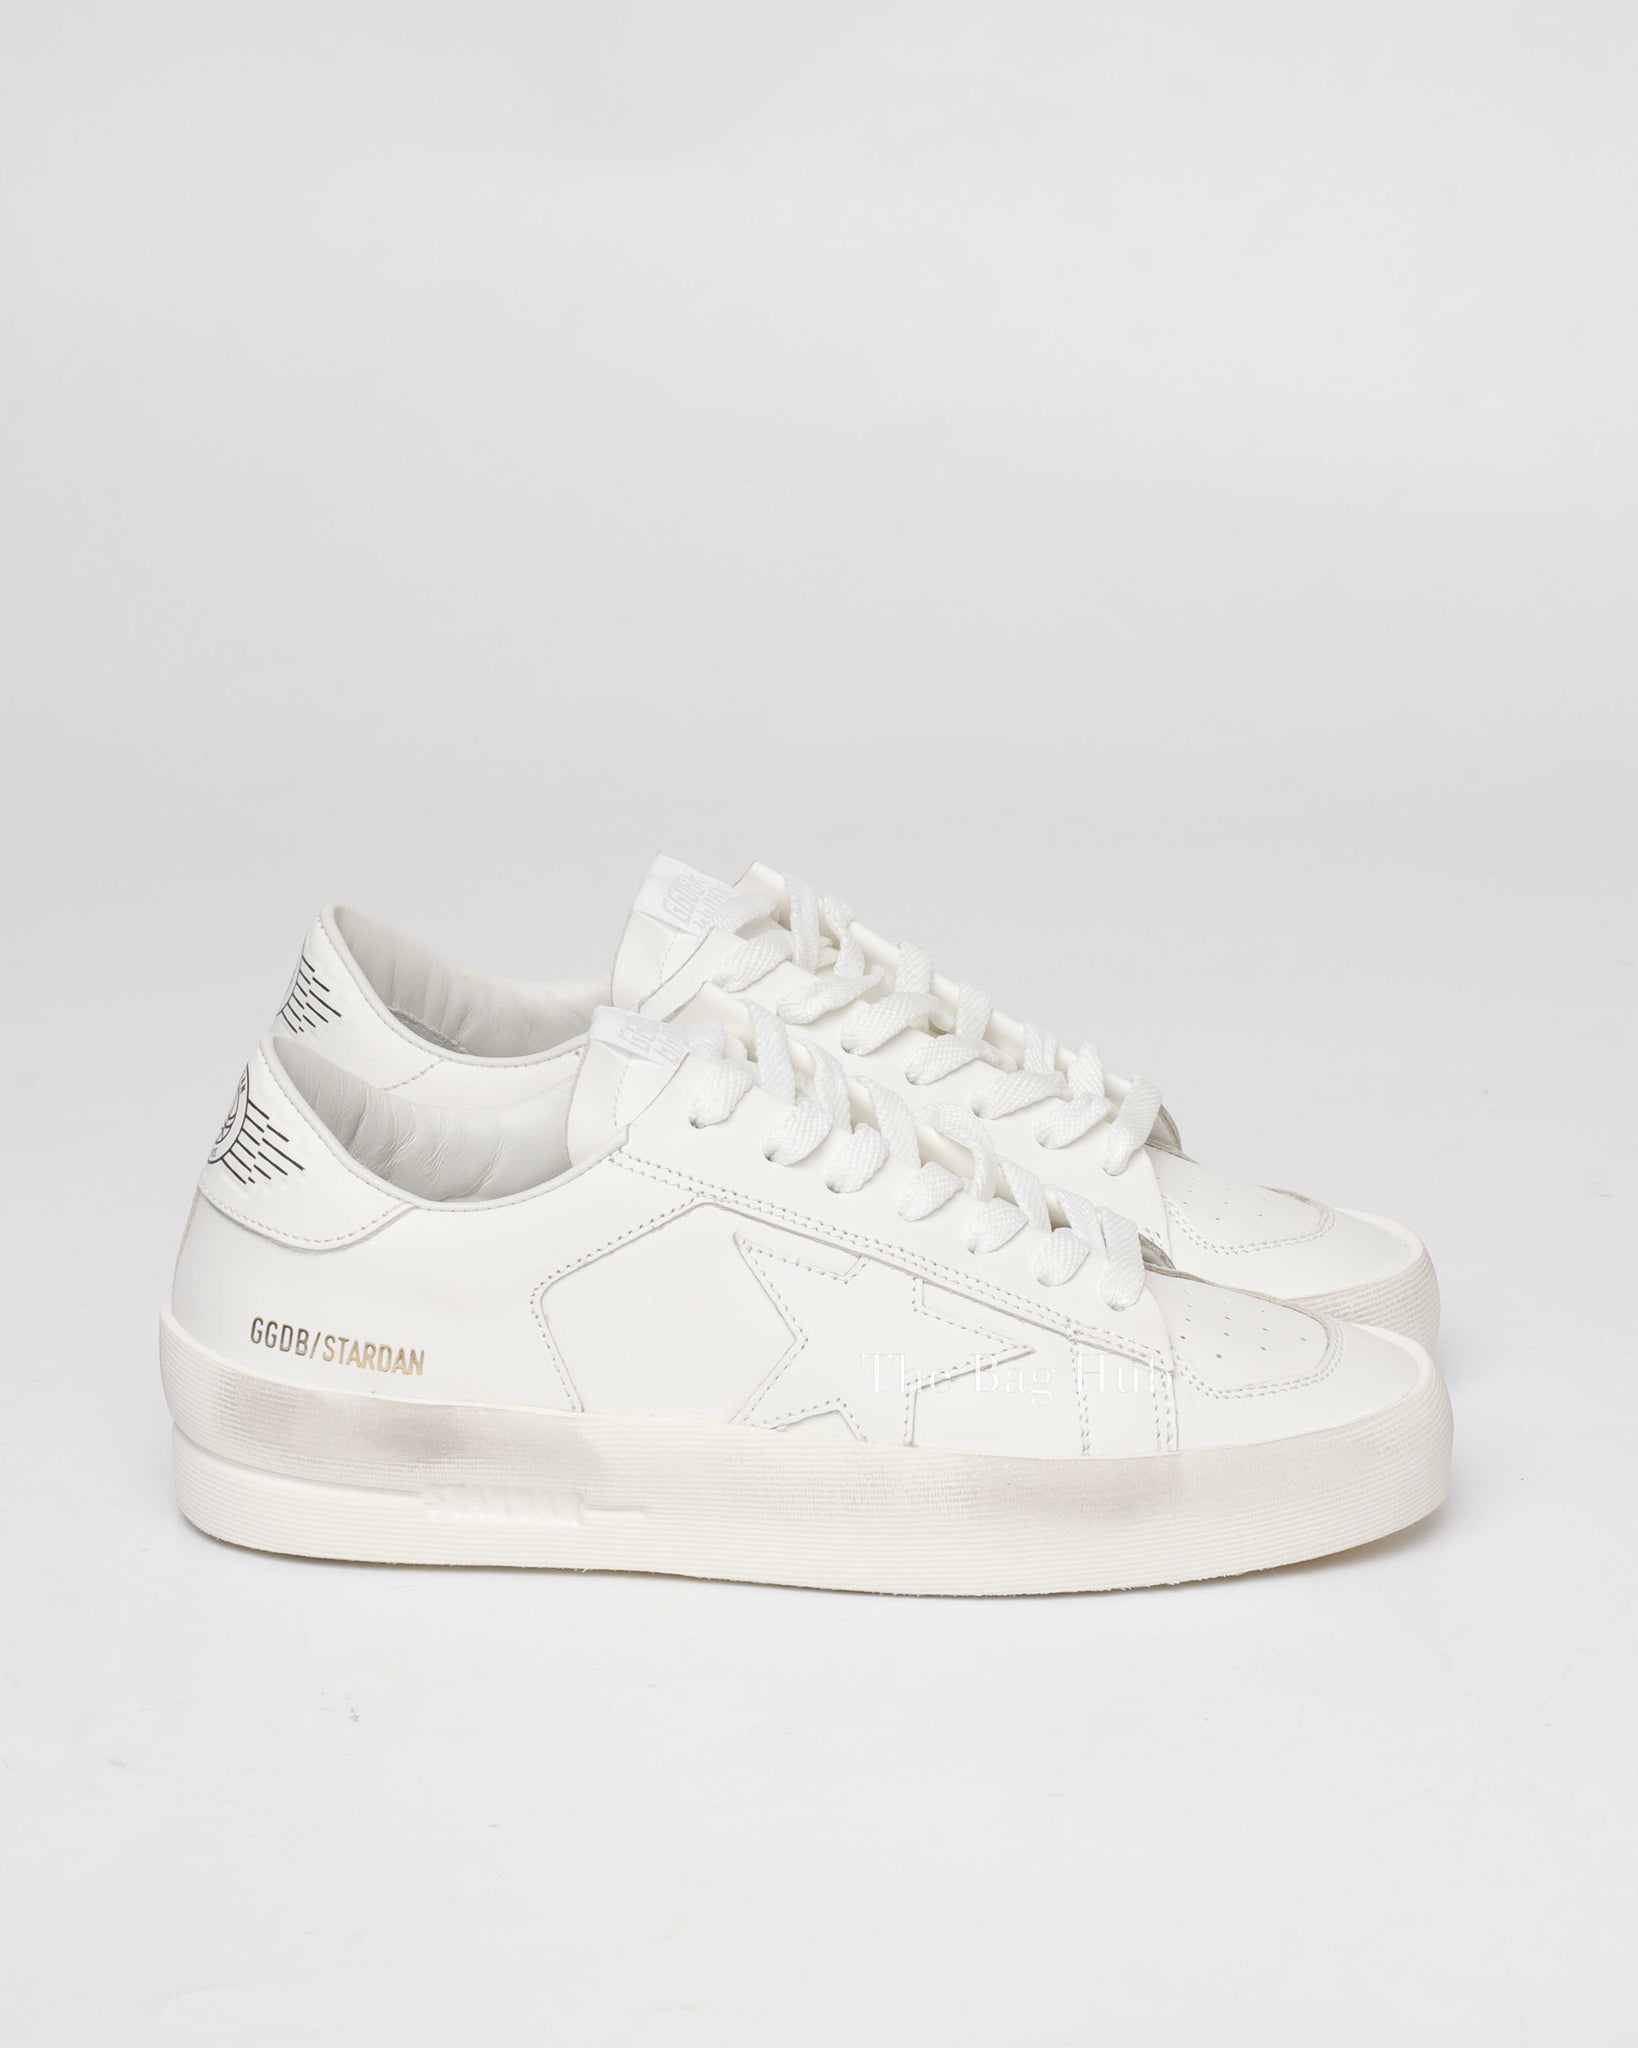 Golden Goose White Leather Stardan Sneakers Size 36-5